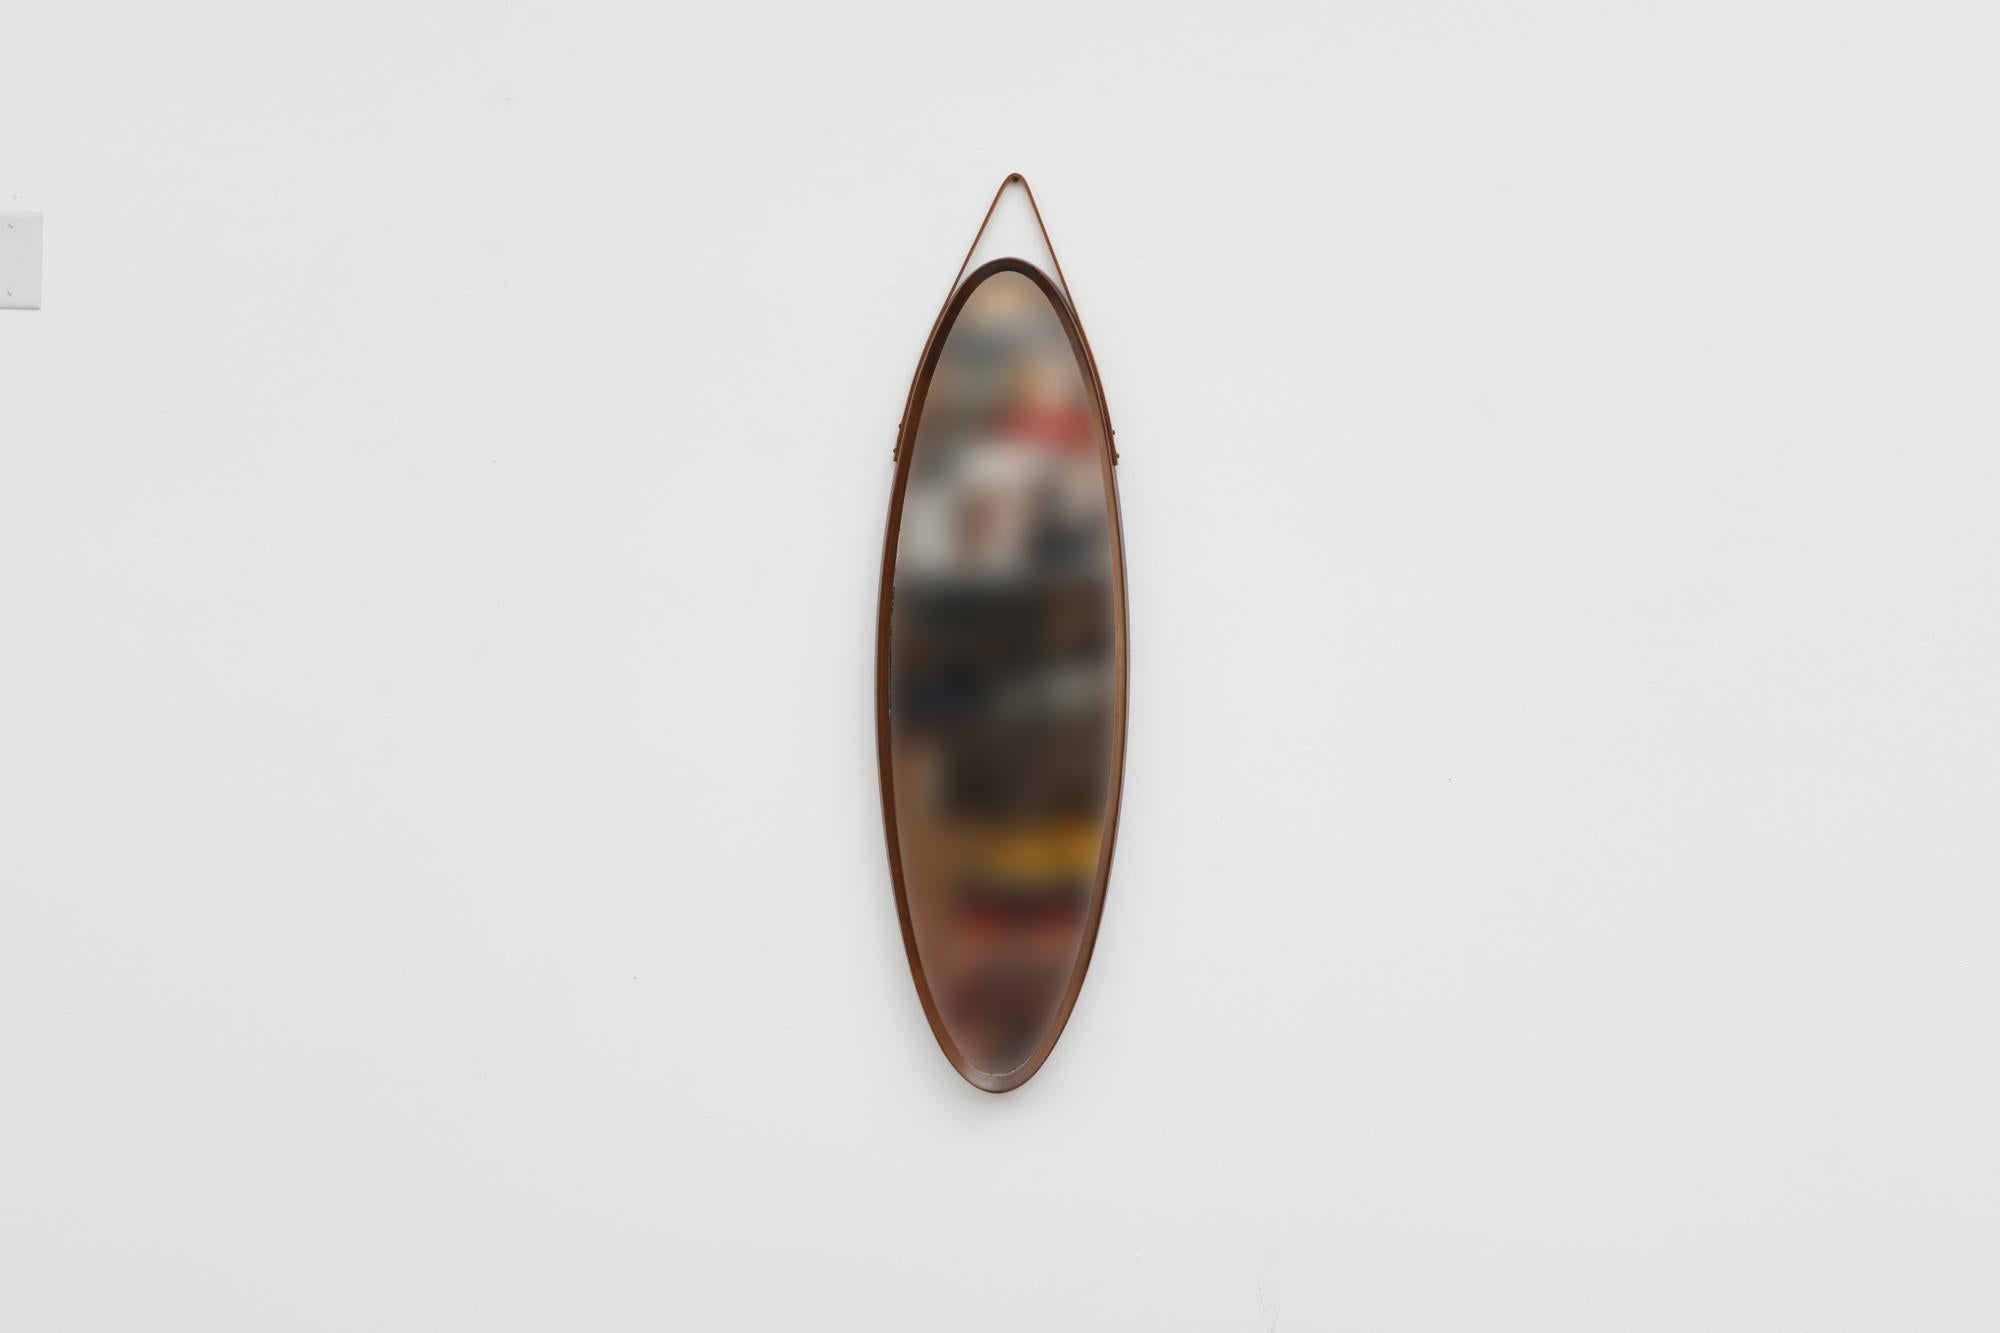 Gorgeous Mid-Century Jacques Adnet style teak oval wall mounted mirror with leather strap. Beautiful bent teak frame in original condition with wear consistent with age and use. Other similar mirrors are available and listed separately